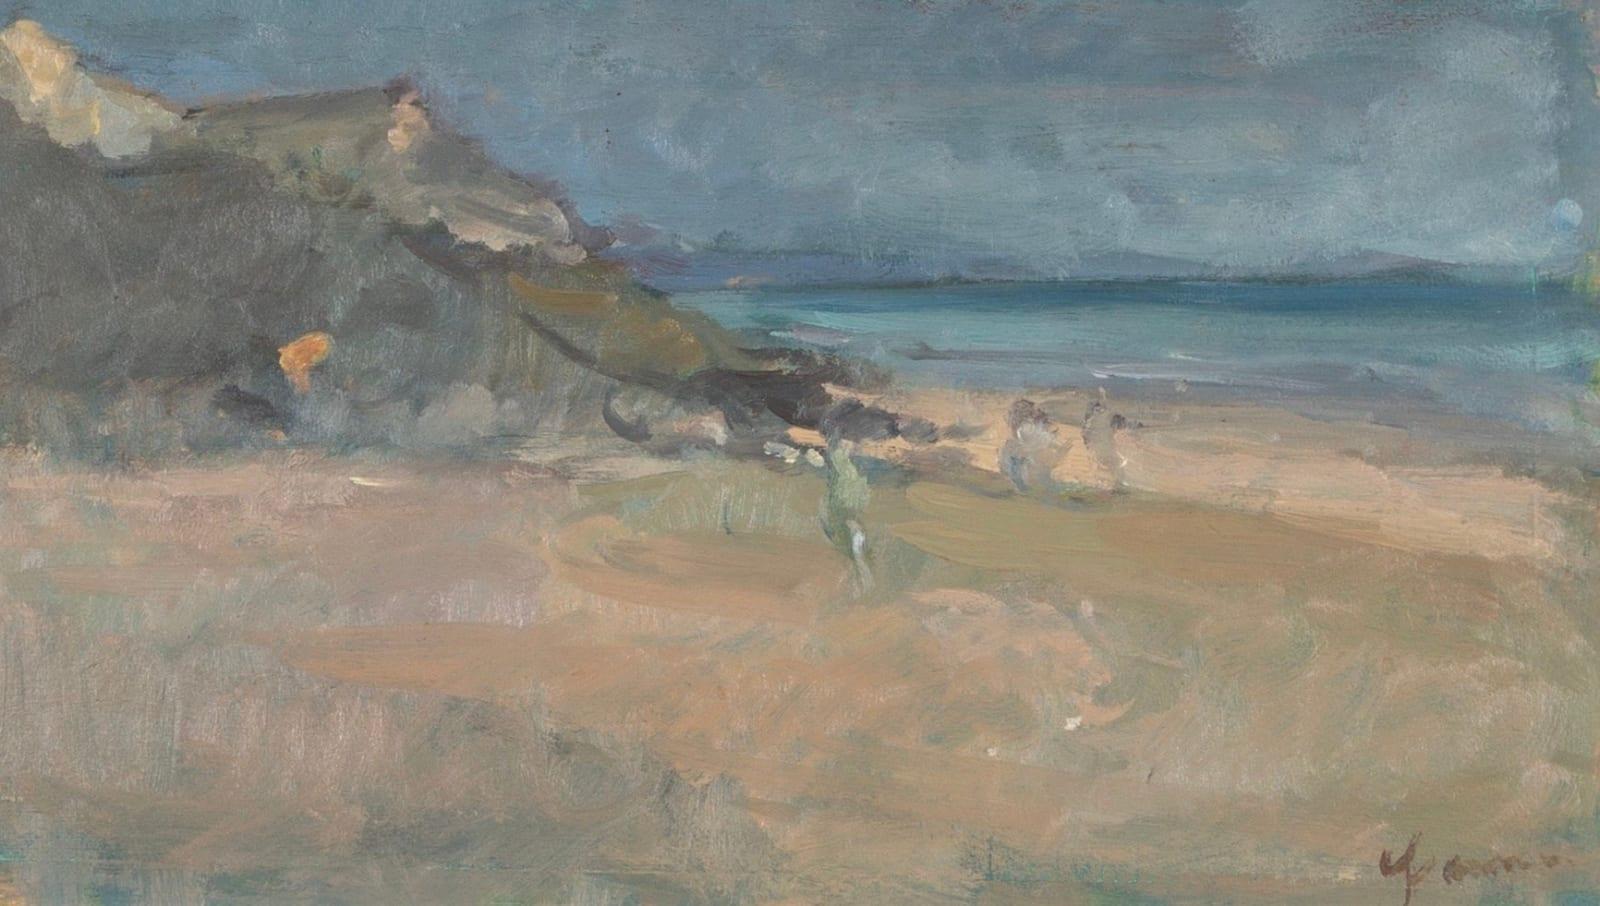 Beach with Cliffs (Dorset) Painting by Martin Yeoman B. 1953

Additional information:
Medium: Oil on paper laid on board
Dimensions: 24 x 35 cm
9 1/2 x 13 3/4 in
Signed

Martin Yeoman was born in 1953, and studied with Peter Greenham at the Royal